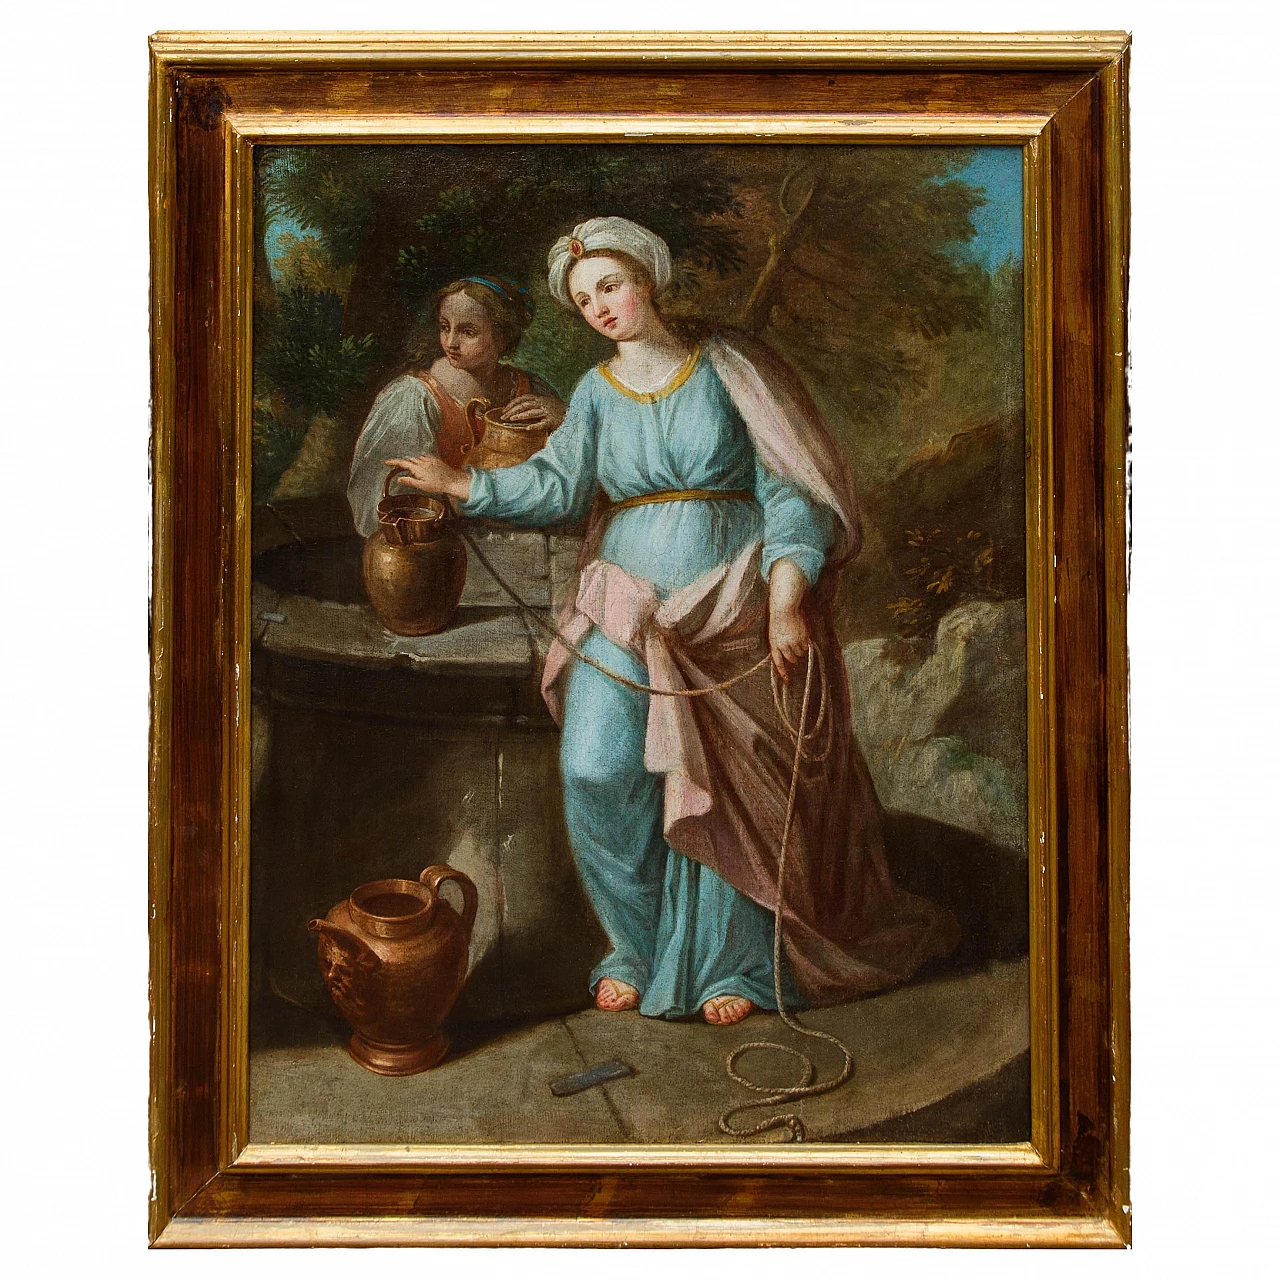 Emilian school, Rebecca at the well, oil on canvas, 17th century 1